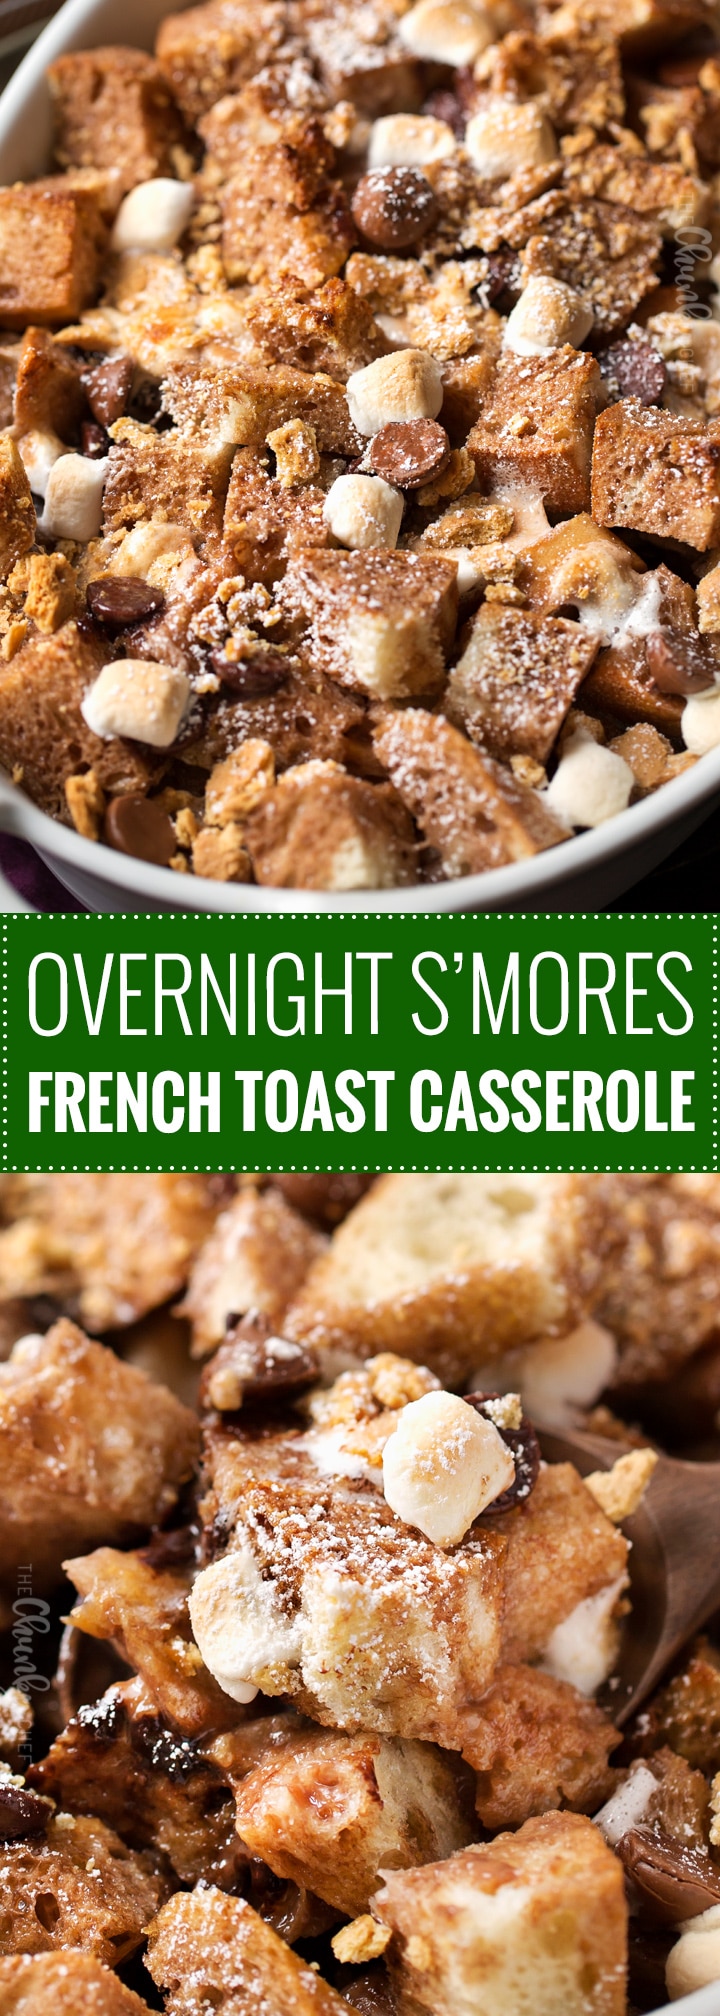 Overnight S'mores French Toast Casserole | Perfect for a holiday breakfast or brunch, sourdough bread is mixed with chocolate chips, marshmallows and graham crackers, then baked up into pure French toast perfection! | https://thechunkychef.com | #frenchtoast #breakfast #brunch #casserole